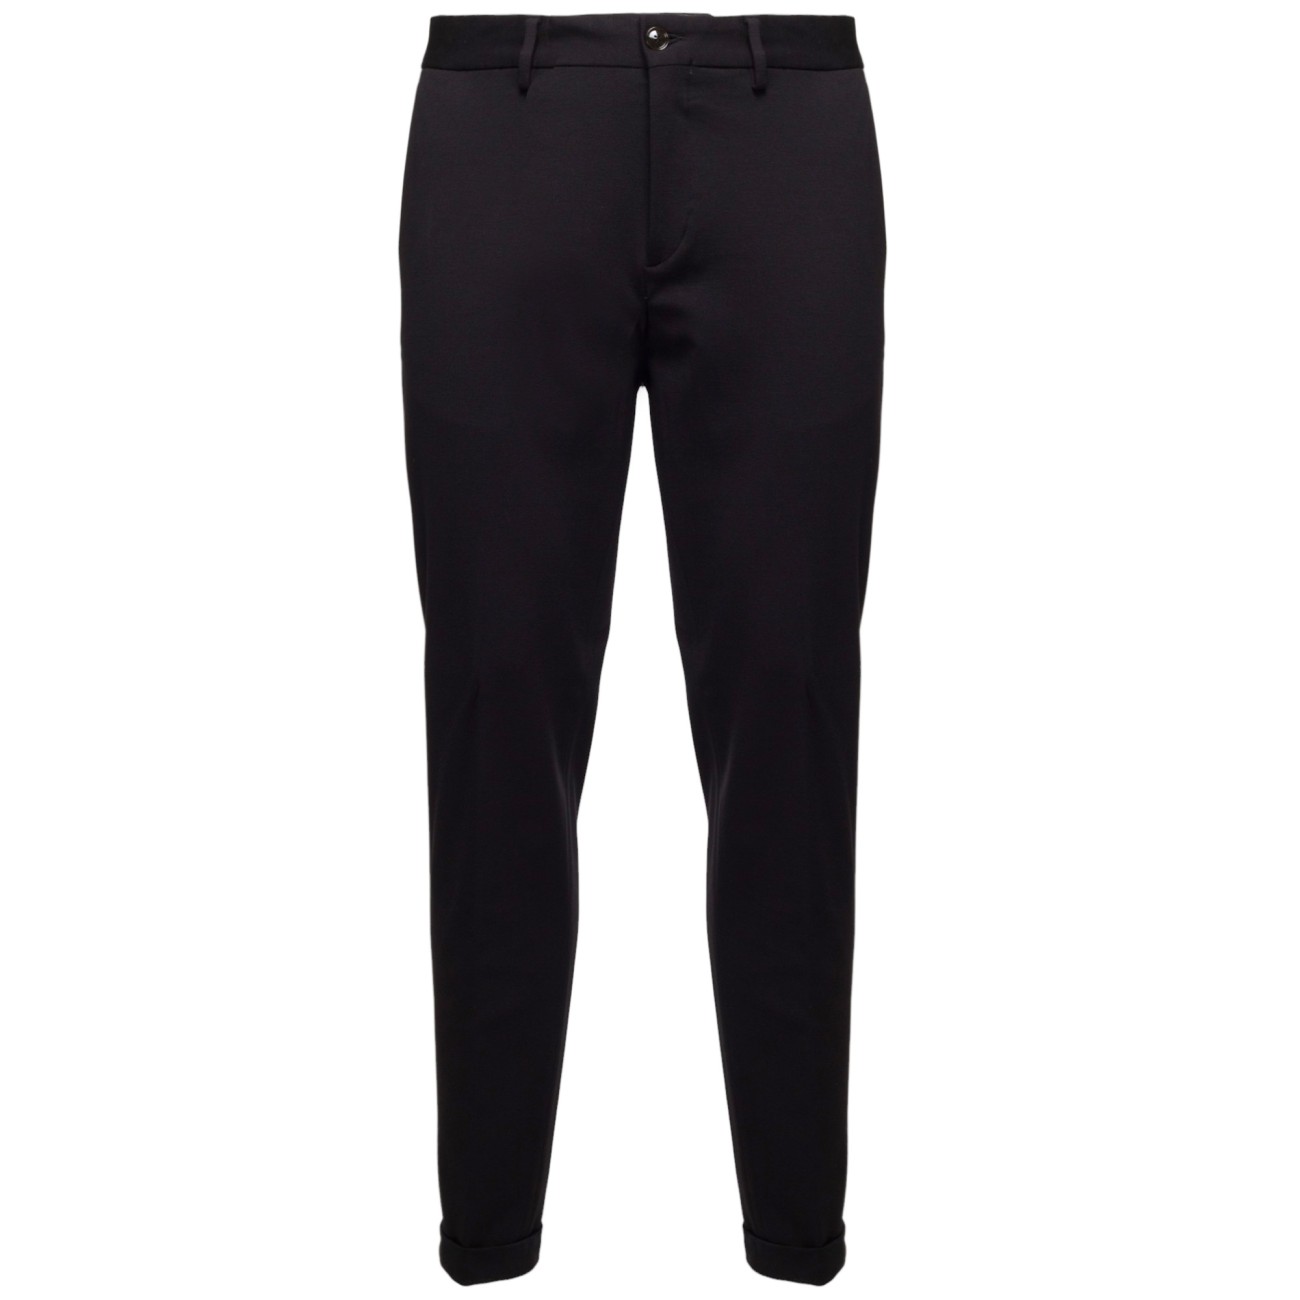 Black trousers outfit